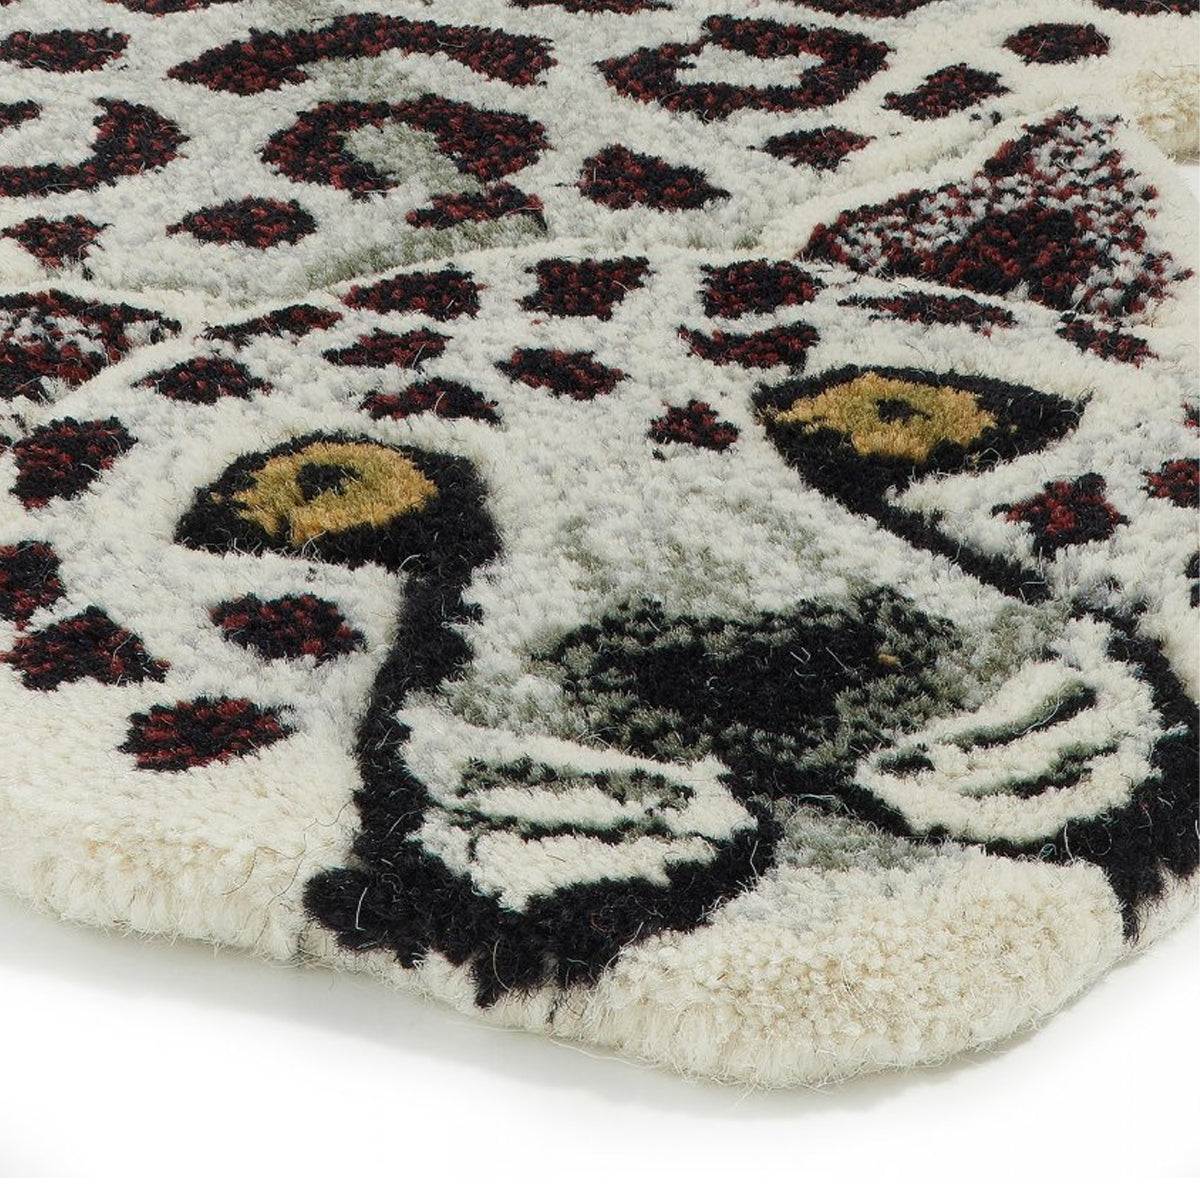 Snowy Leopard Rug Small - Doing Goods